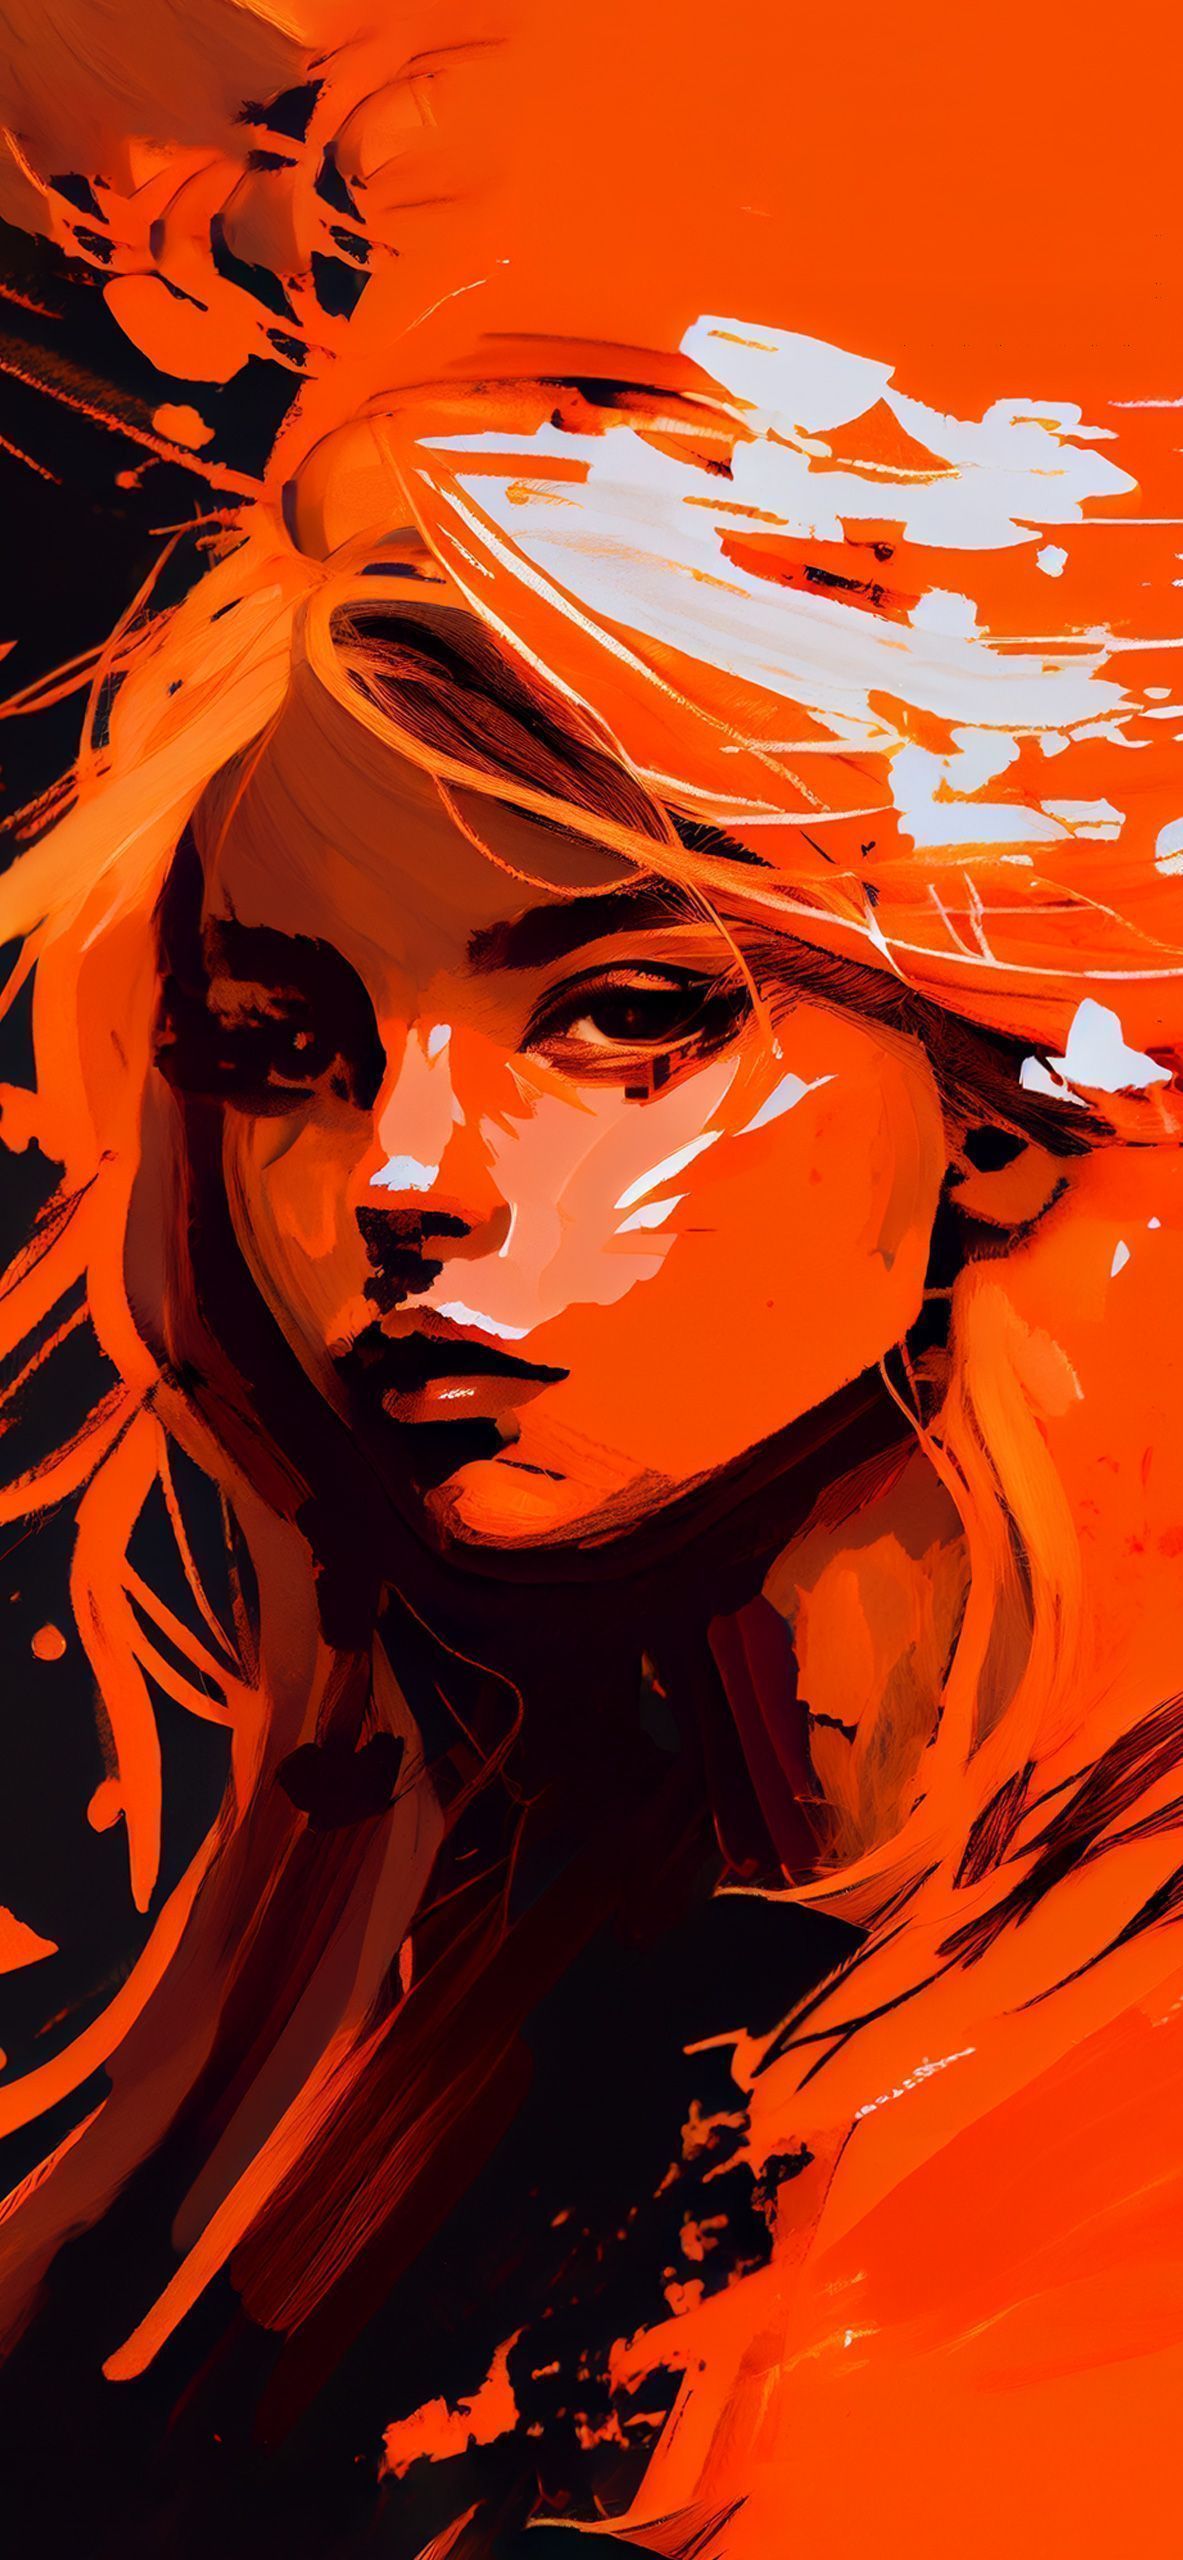 A painting of an orange haired woman - Orange